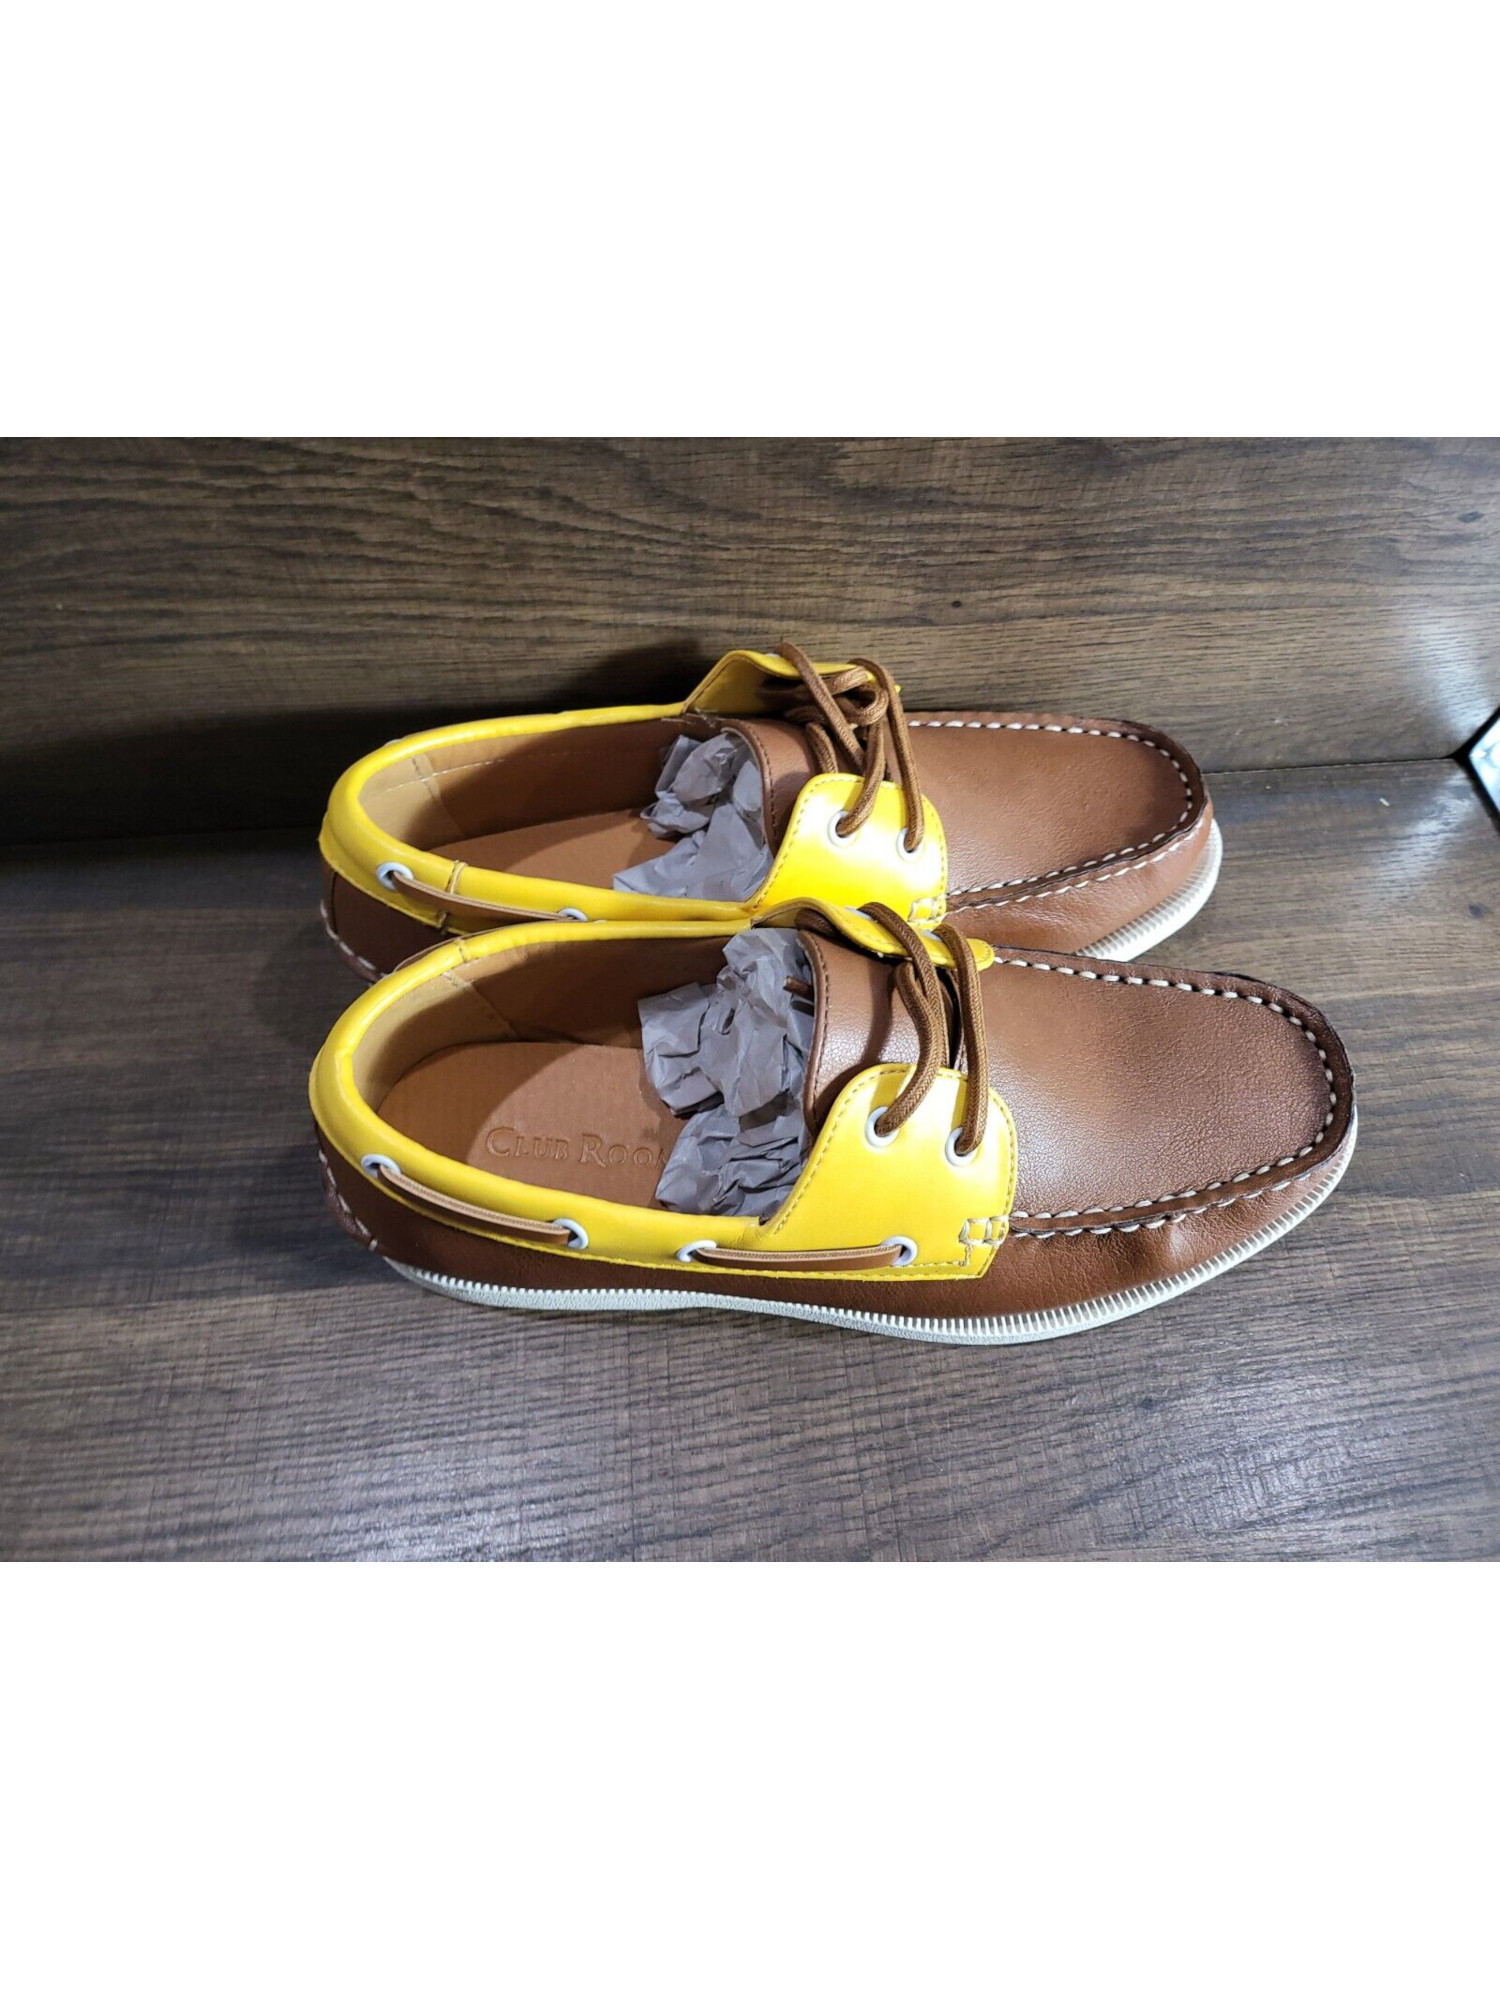 CLUBROOM Mens Brown Comfort Elliot Round Toe Lace-Up Boat Shoes 10.5 M